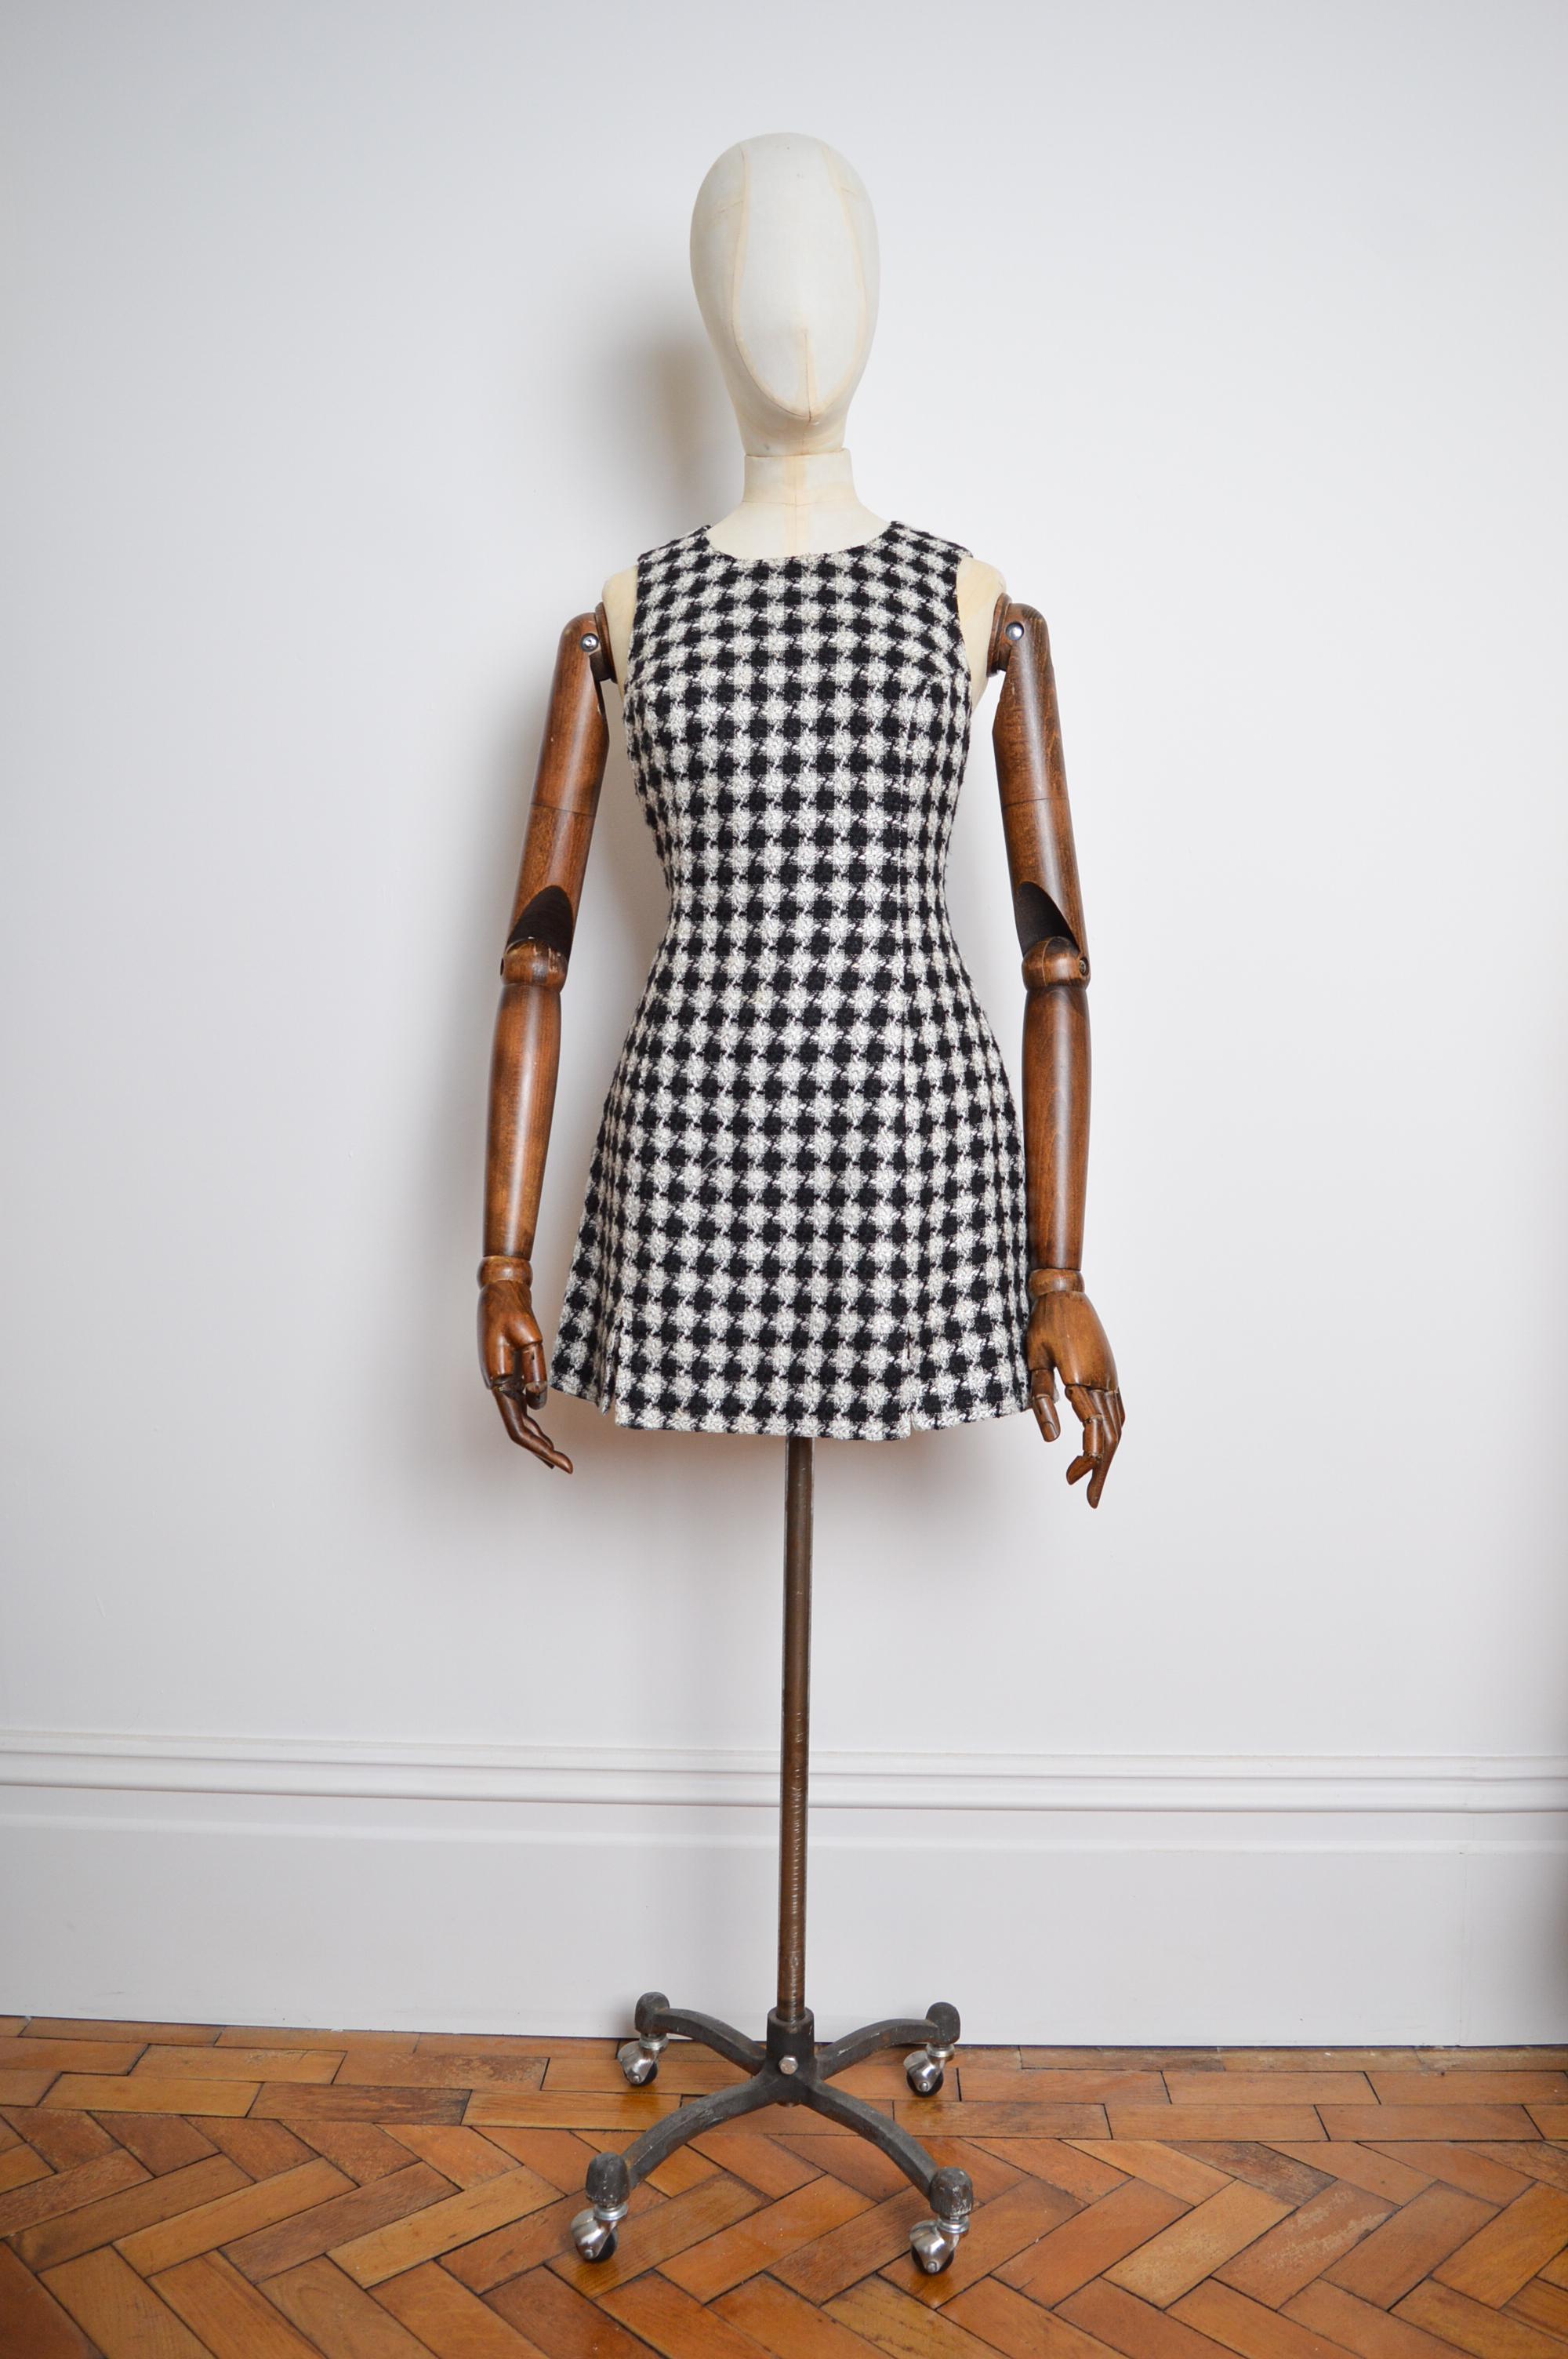 Chic 1990's Vintage Gianni Versace Jeans Couture mini dress ! 

Crafted from Black & White houndstooth Tweed this effortlessly cool mini Dress looks superb styled alone or layered over a collared shirt too.   

MADE IN ITALY !   

Features: 